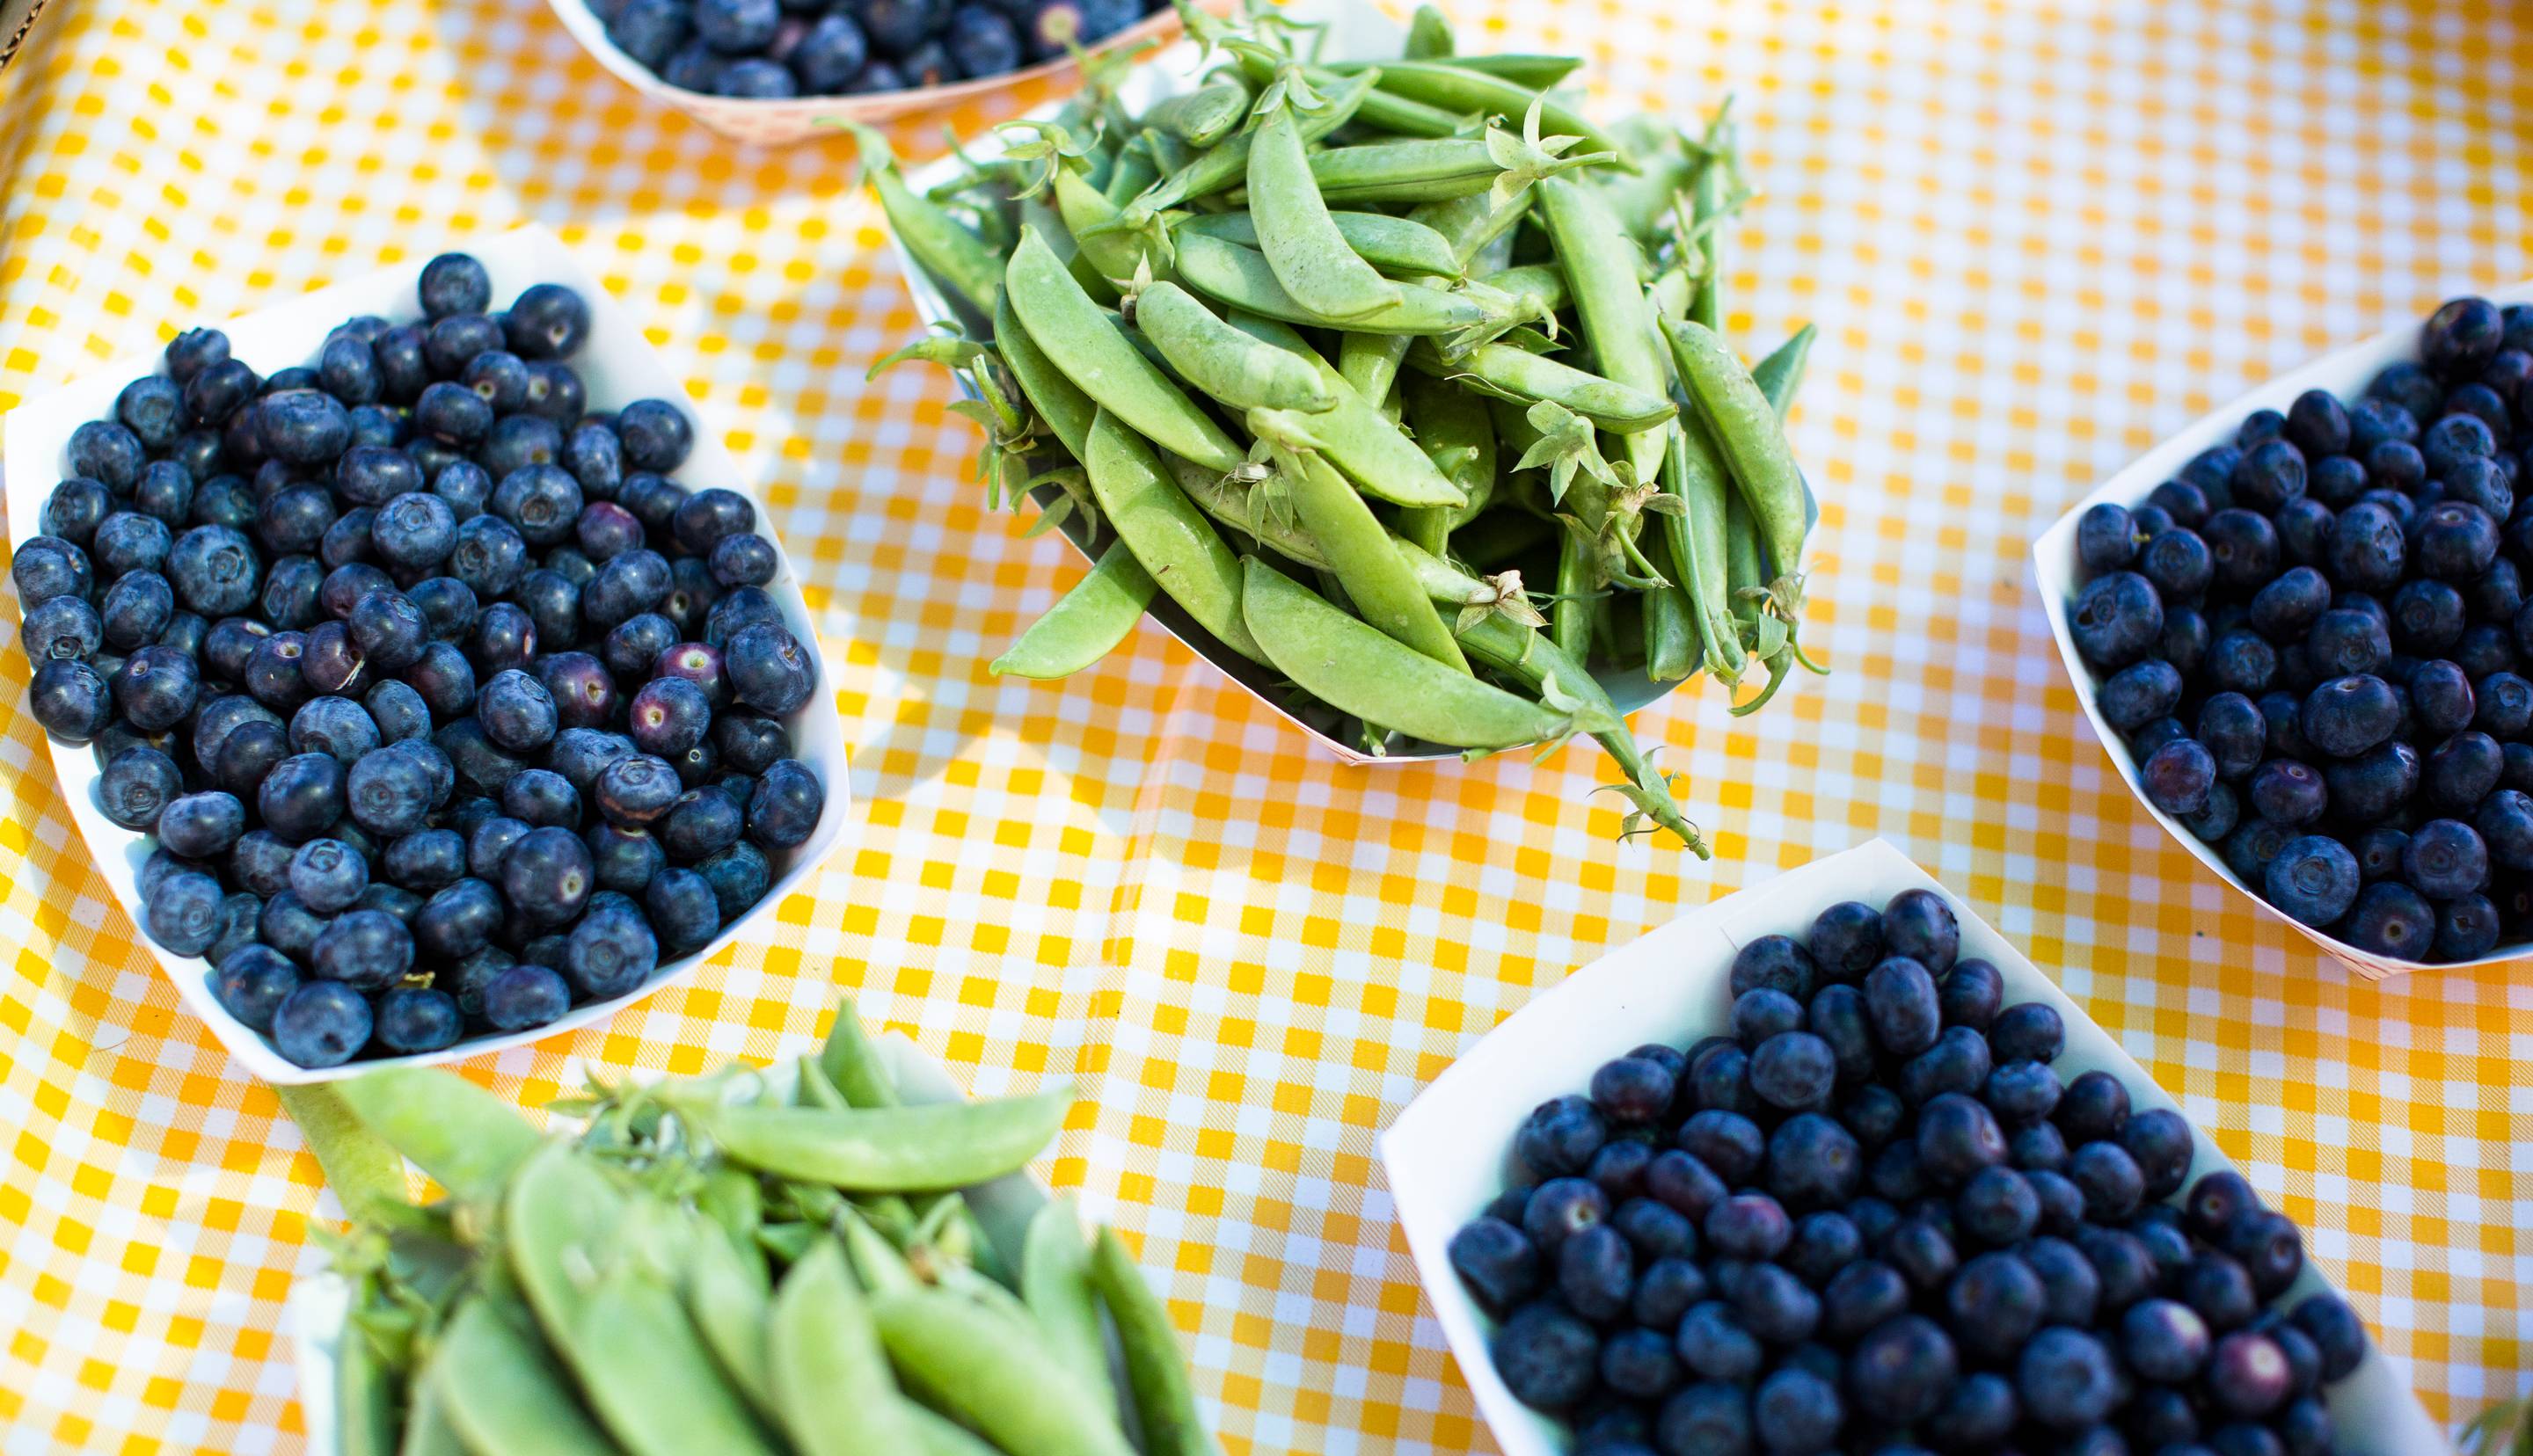 Blueberries and green beans in paper trays on a yellow checked tablecloth